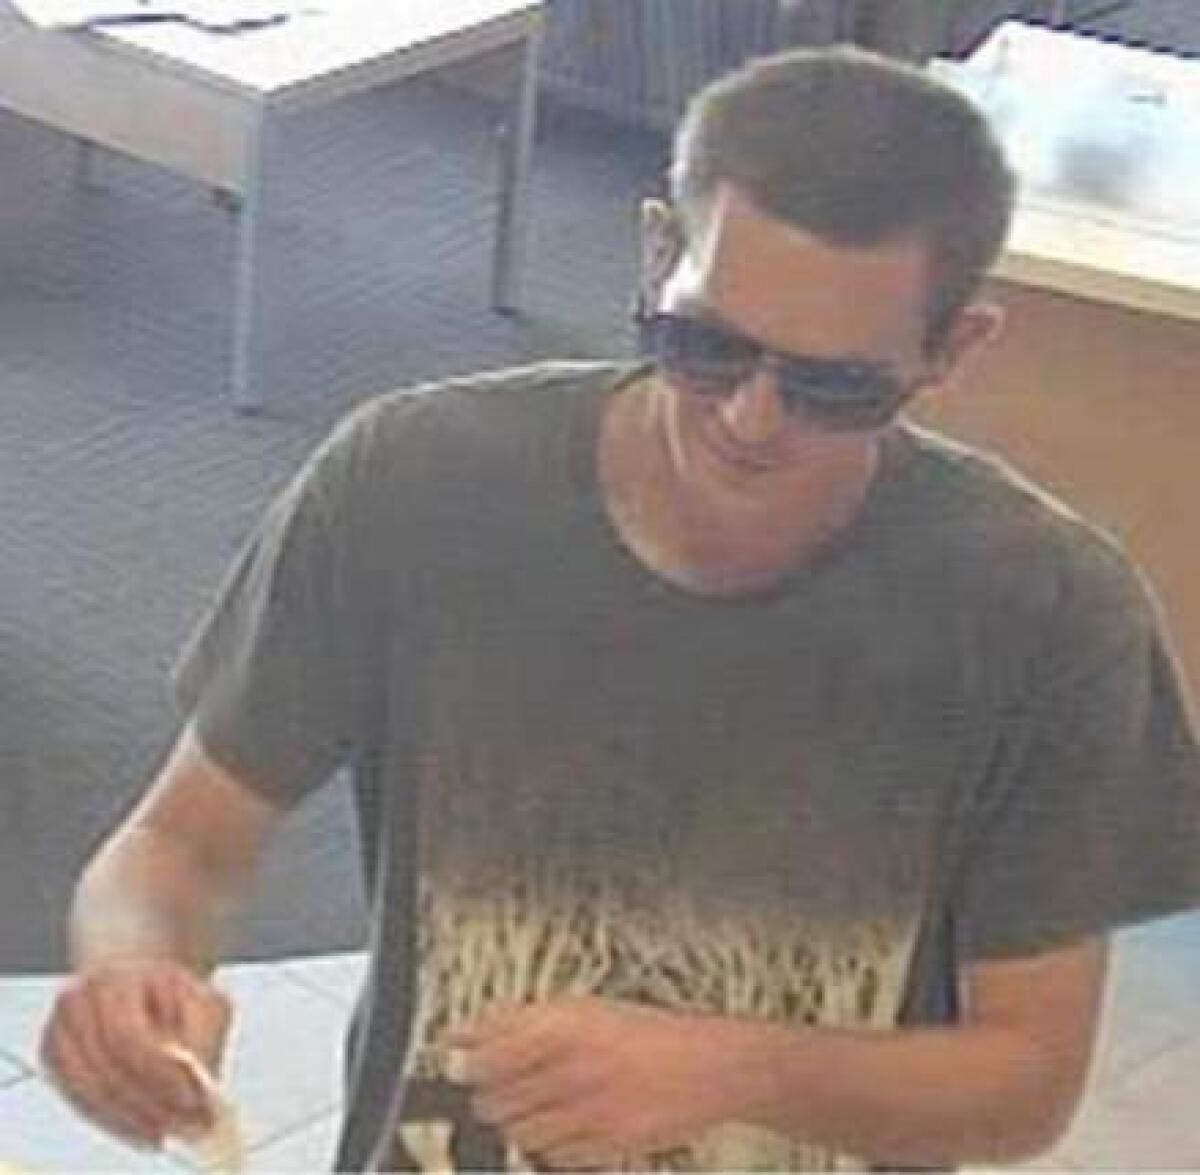 Police released this photo in July of a man in his mid-20s wearing Prada sunglasses who is suspected of robbing a Wells Fargo bank branch in the 3600 block of East Coast Highway.